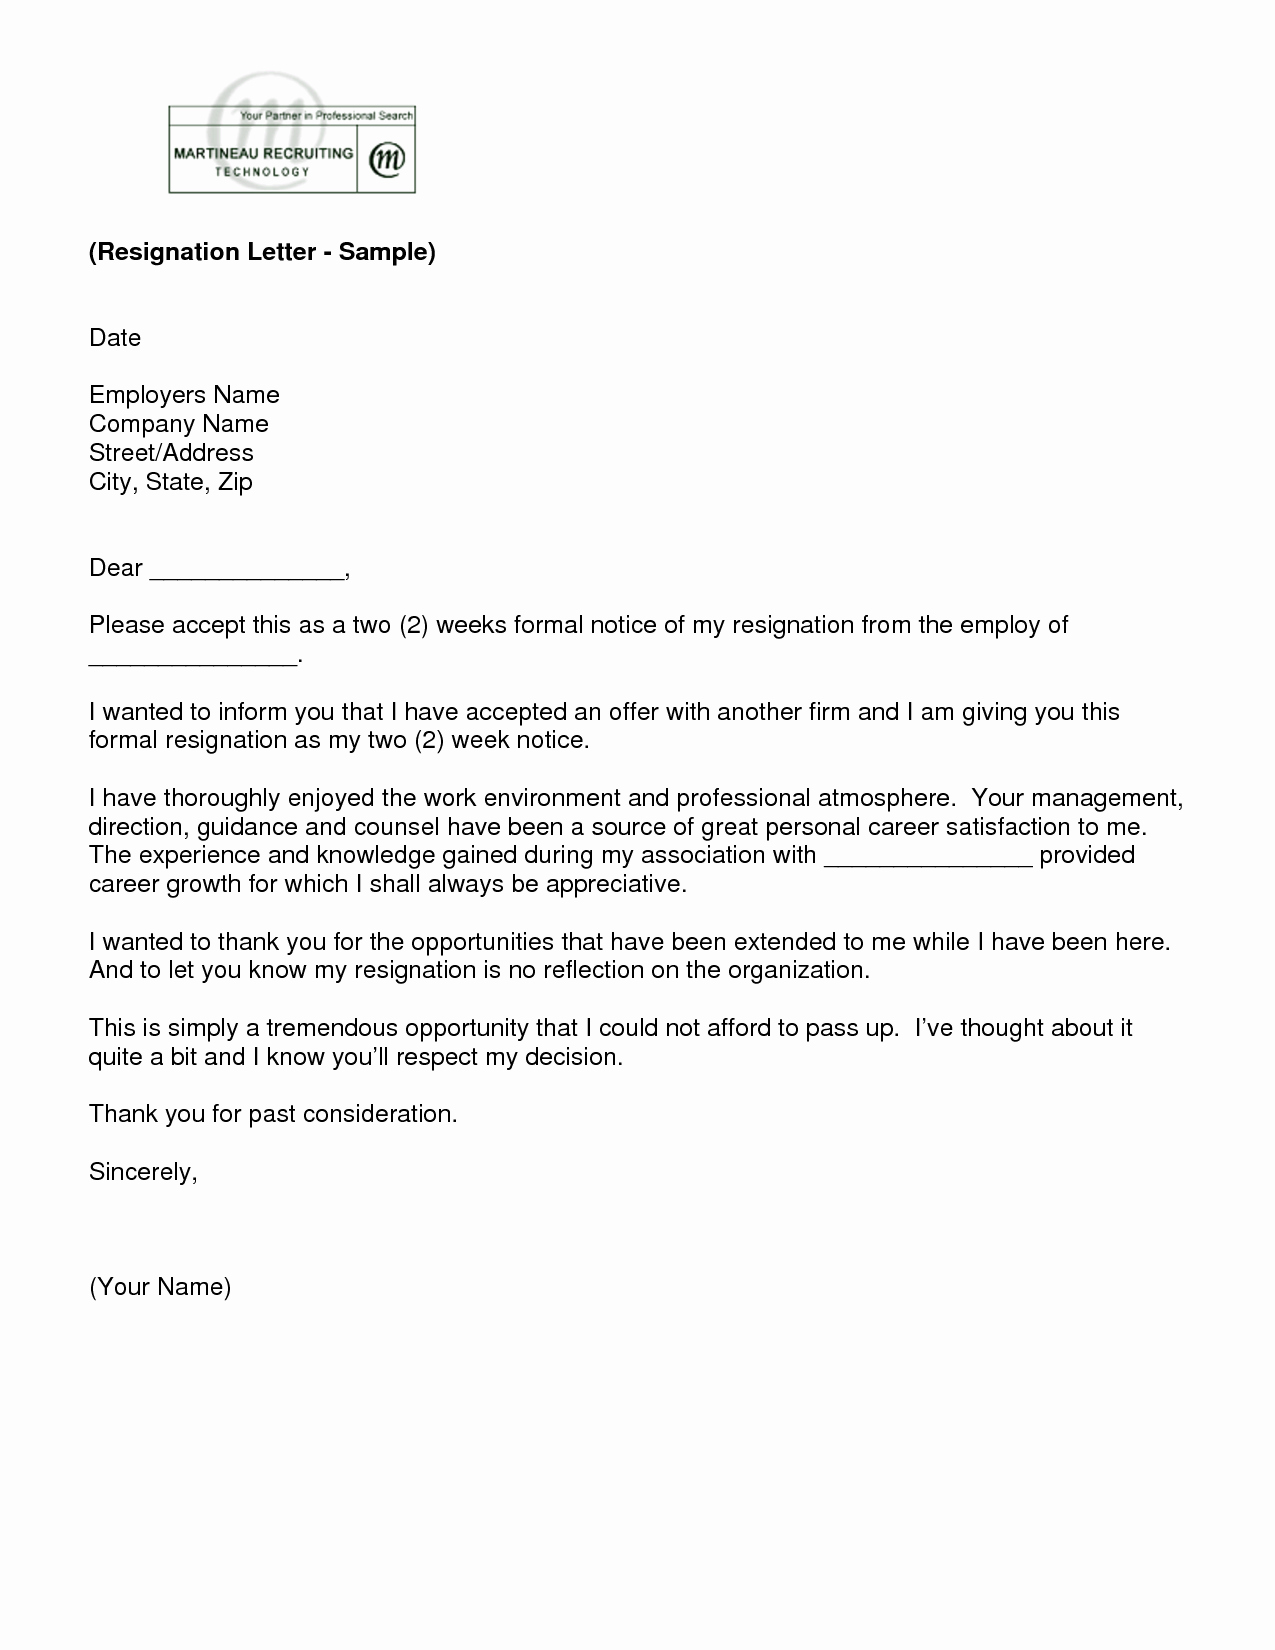 2 Weeks Notice Email Template Lovely Letter Of Resignation 2 Weeks Notice Template